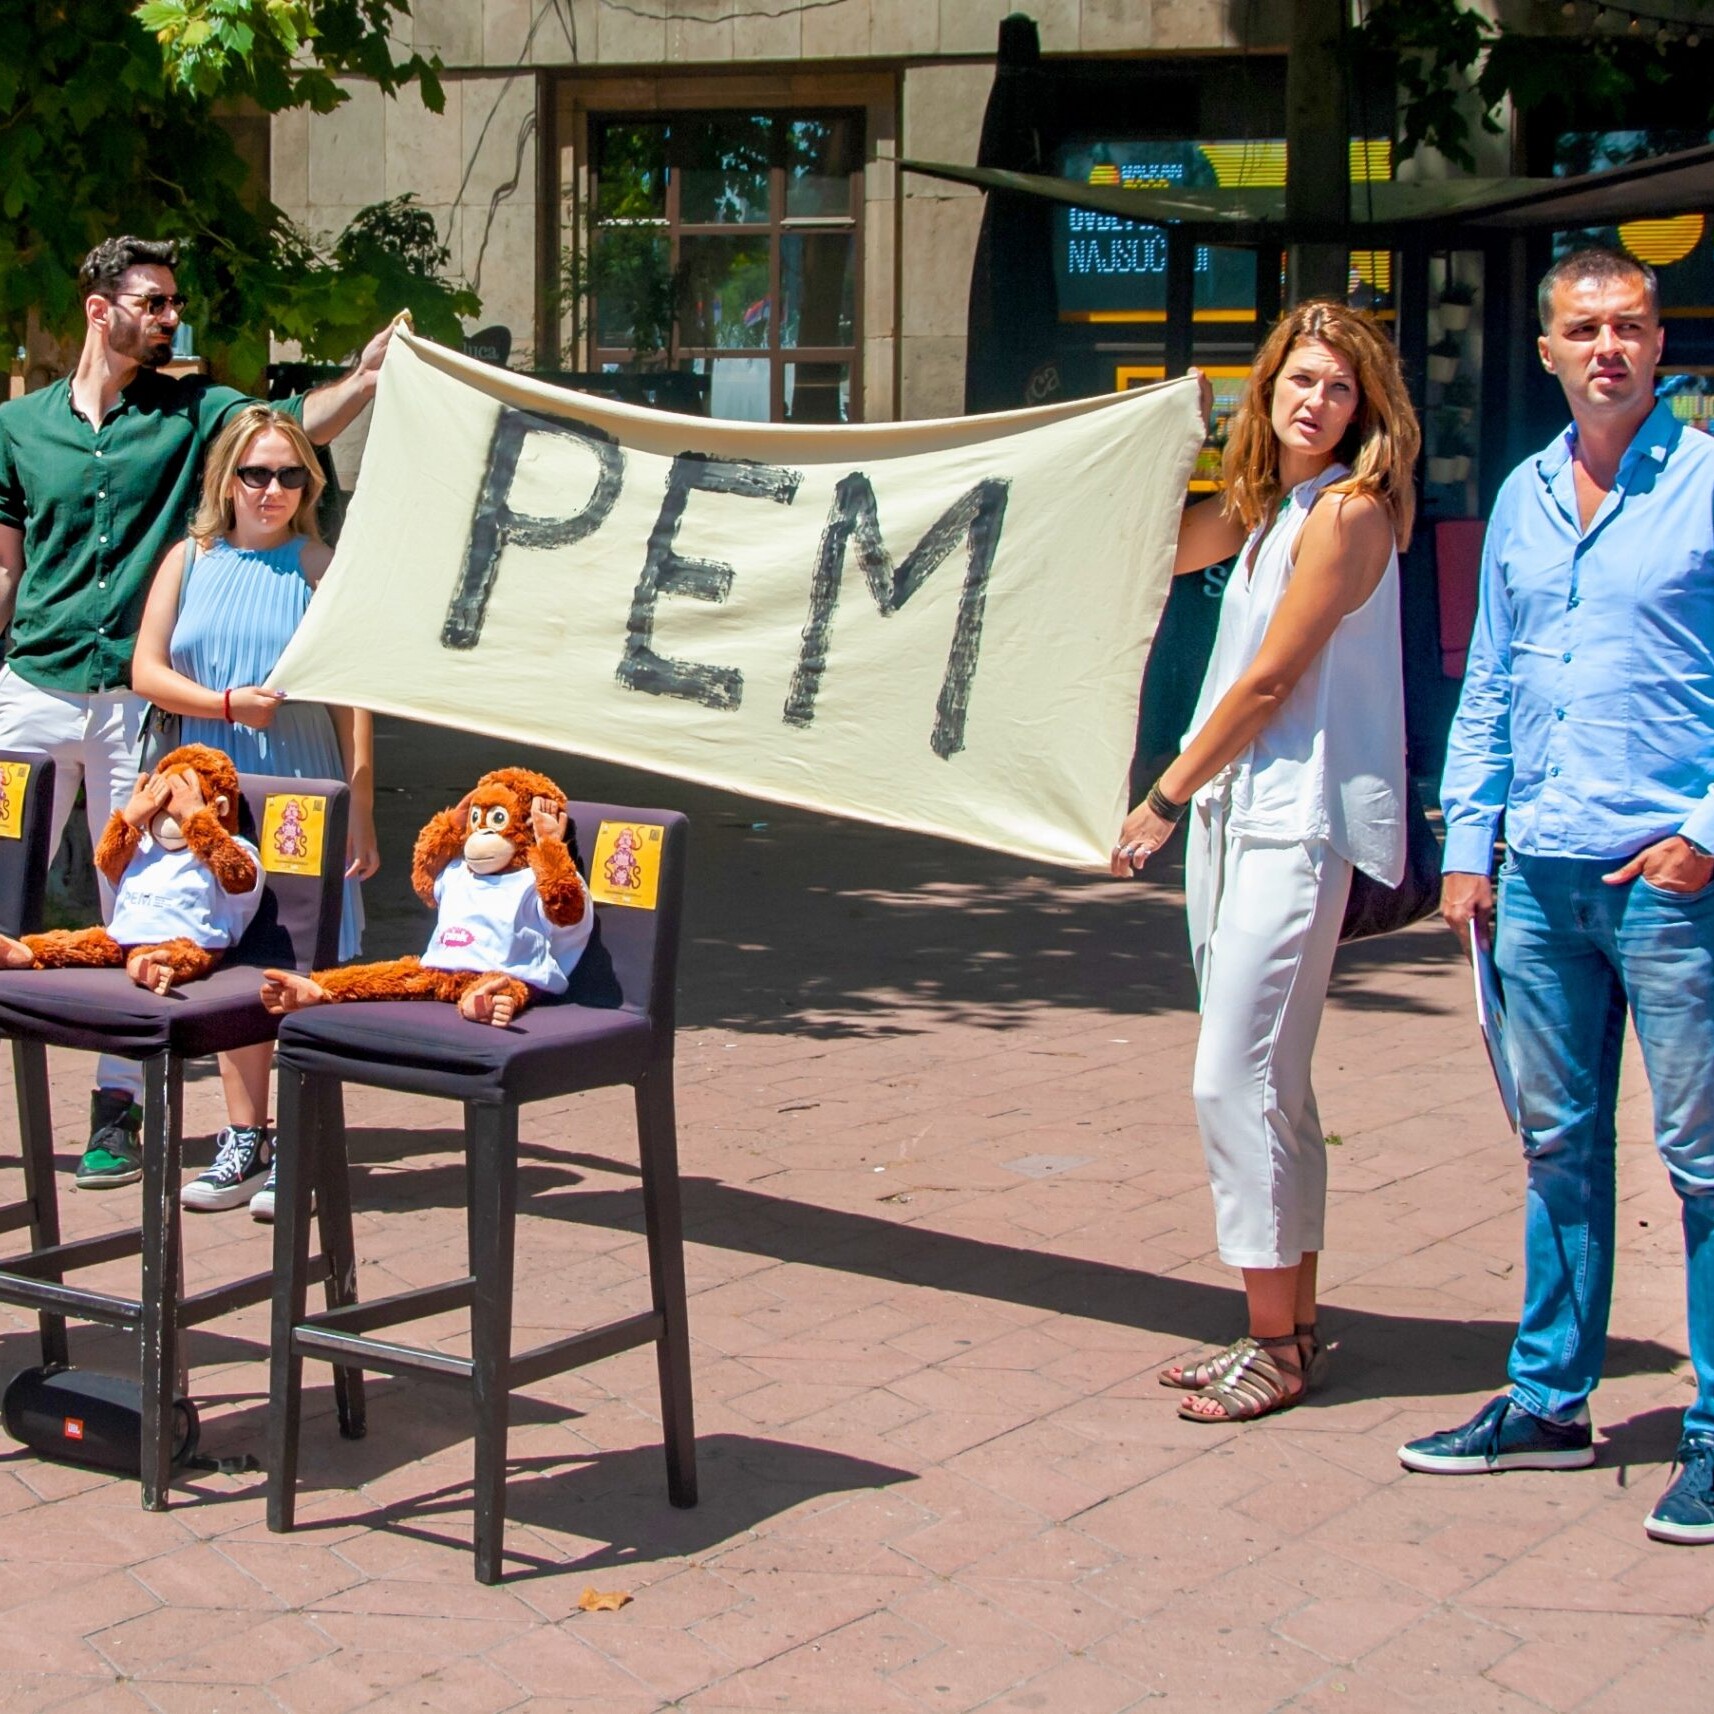 Protesters against REM in Belgrade, Serbia